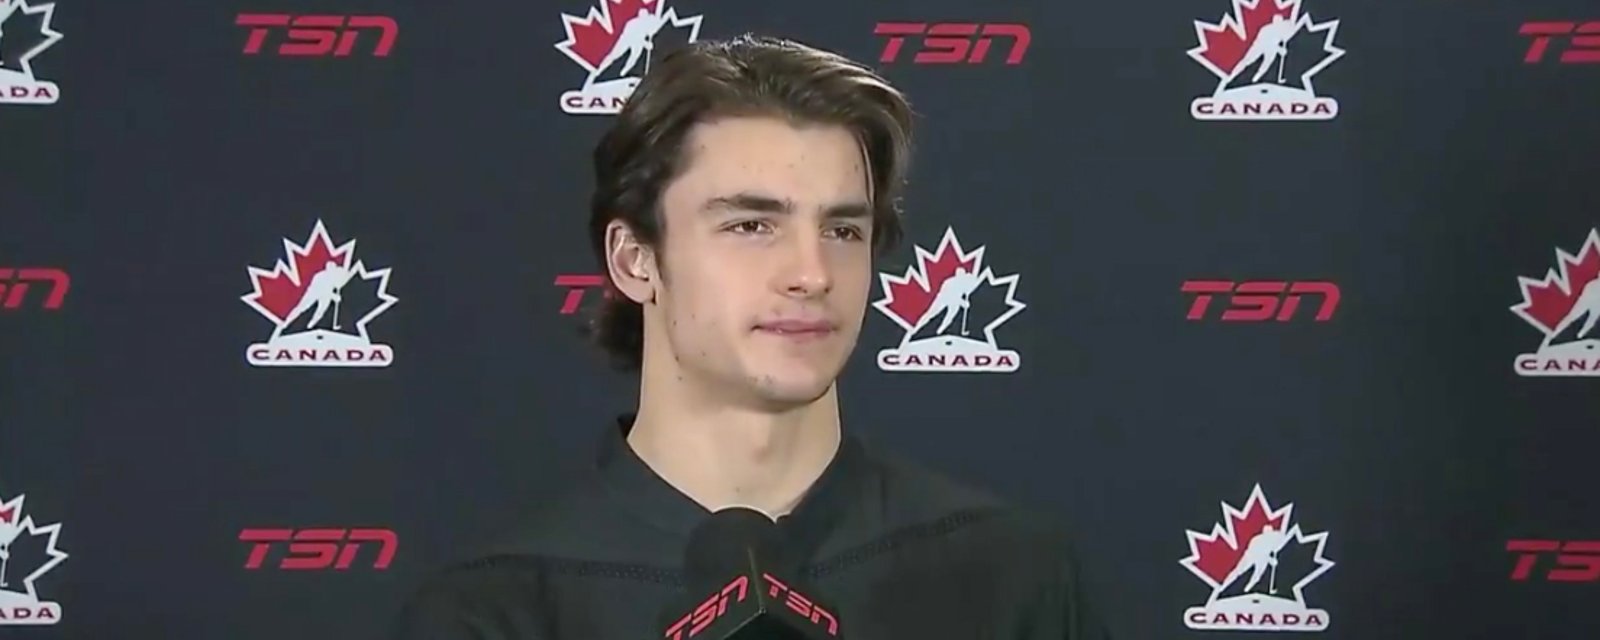 Team Canada’s Schneider with touching tribute to Humboldt Broncos at WJC